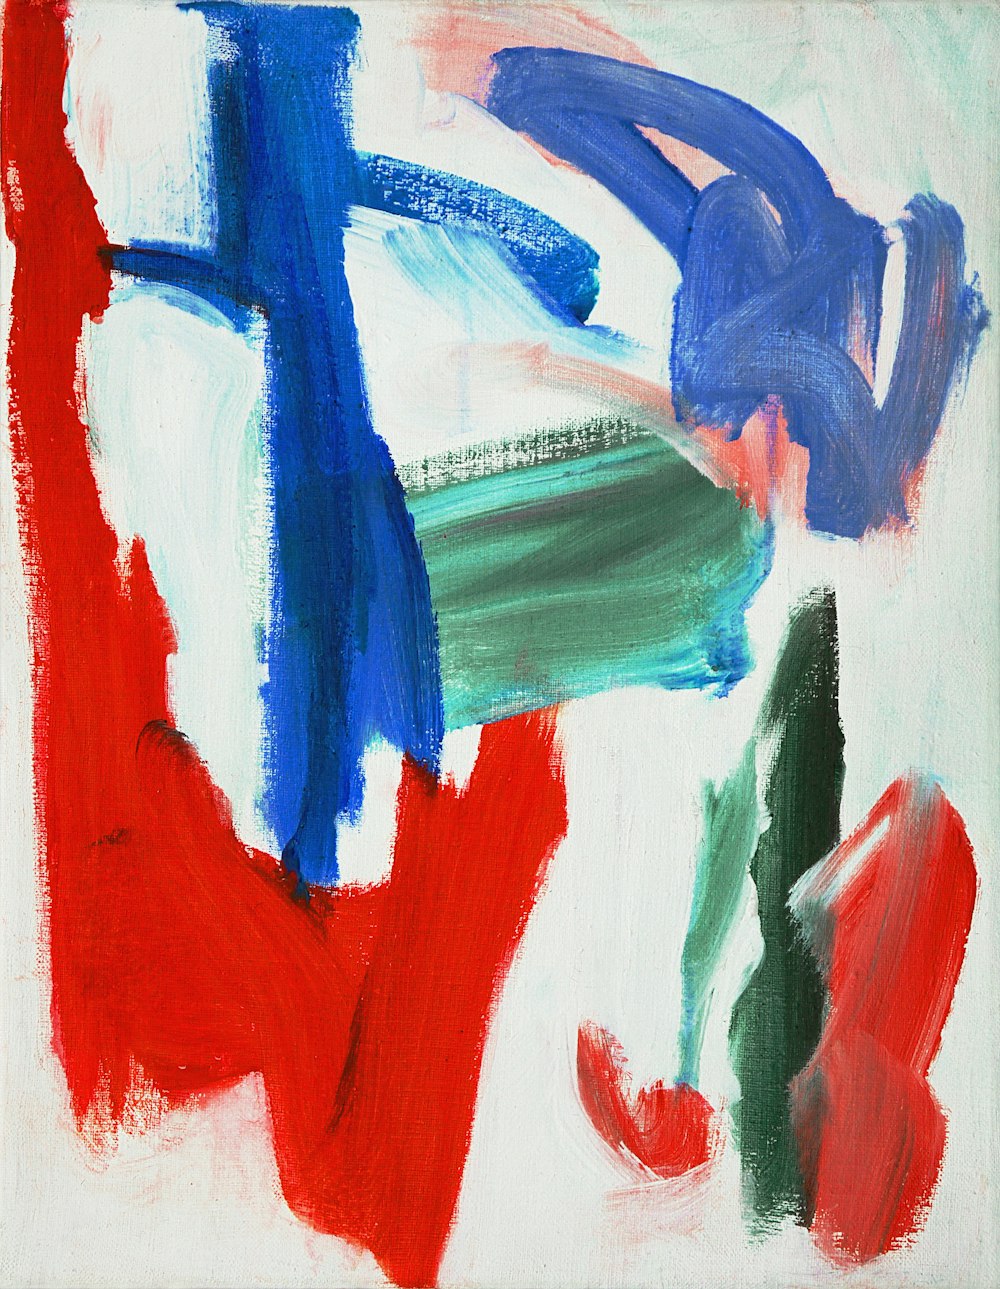 an abstract painting with blue, red, and green colors